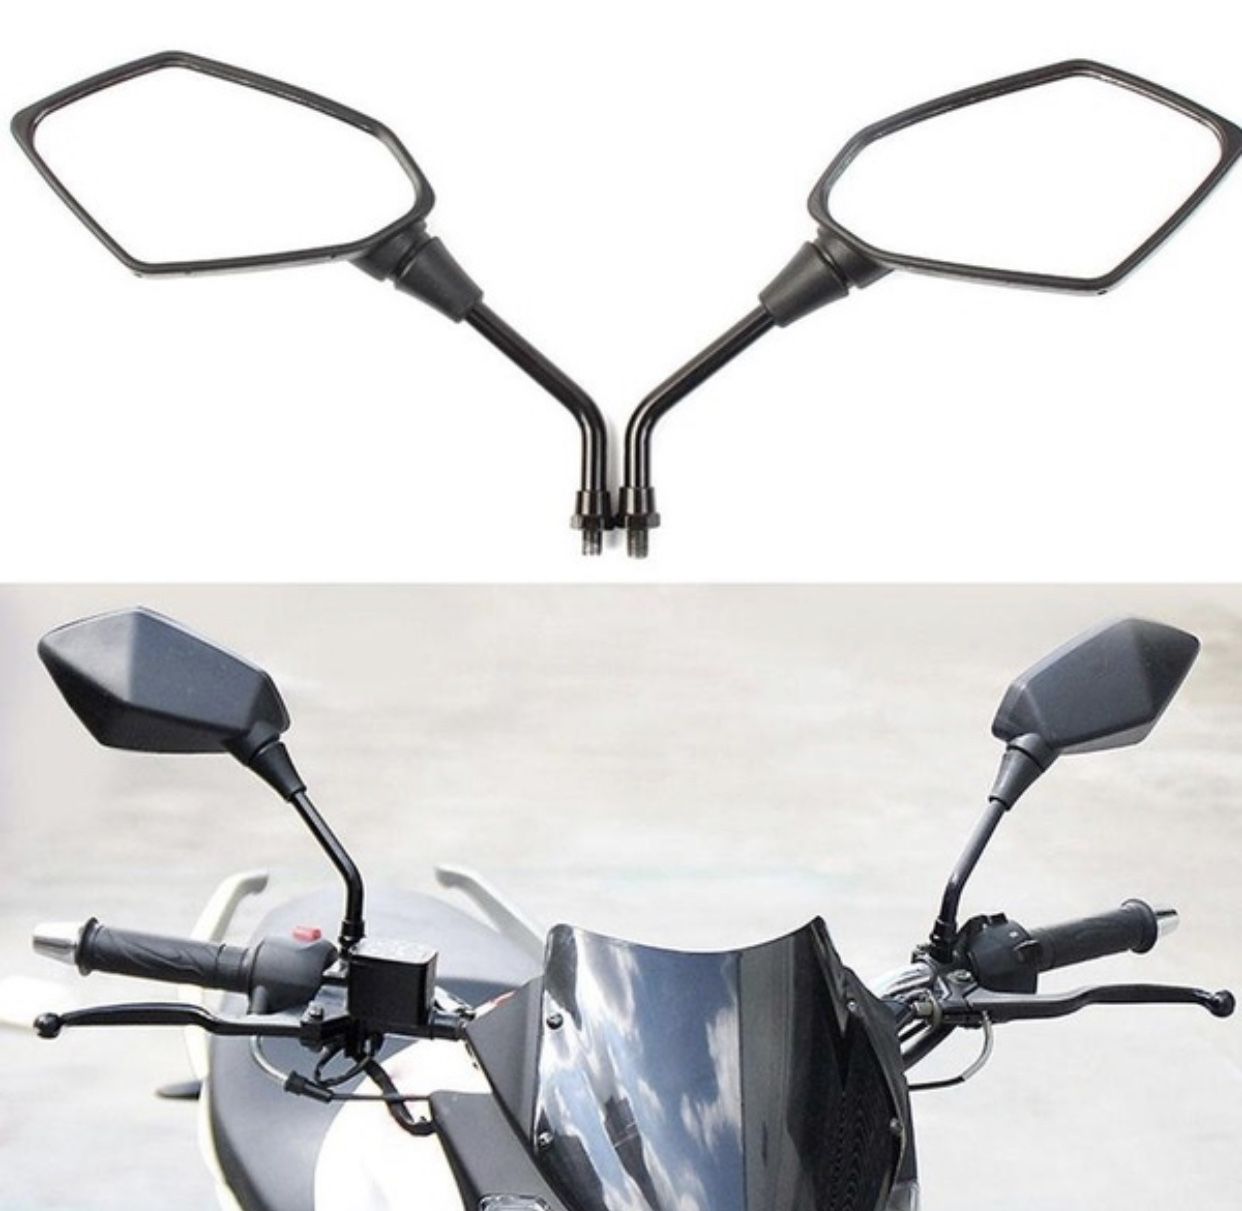 New in Box Universal Fit Motorcycle Rear Mirrors